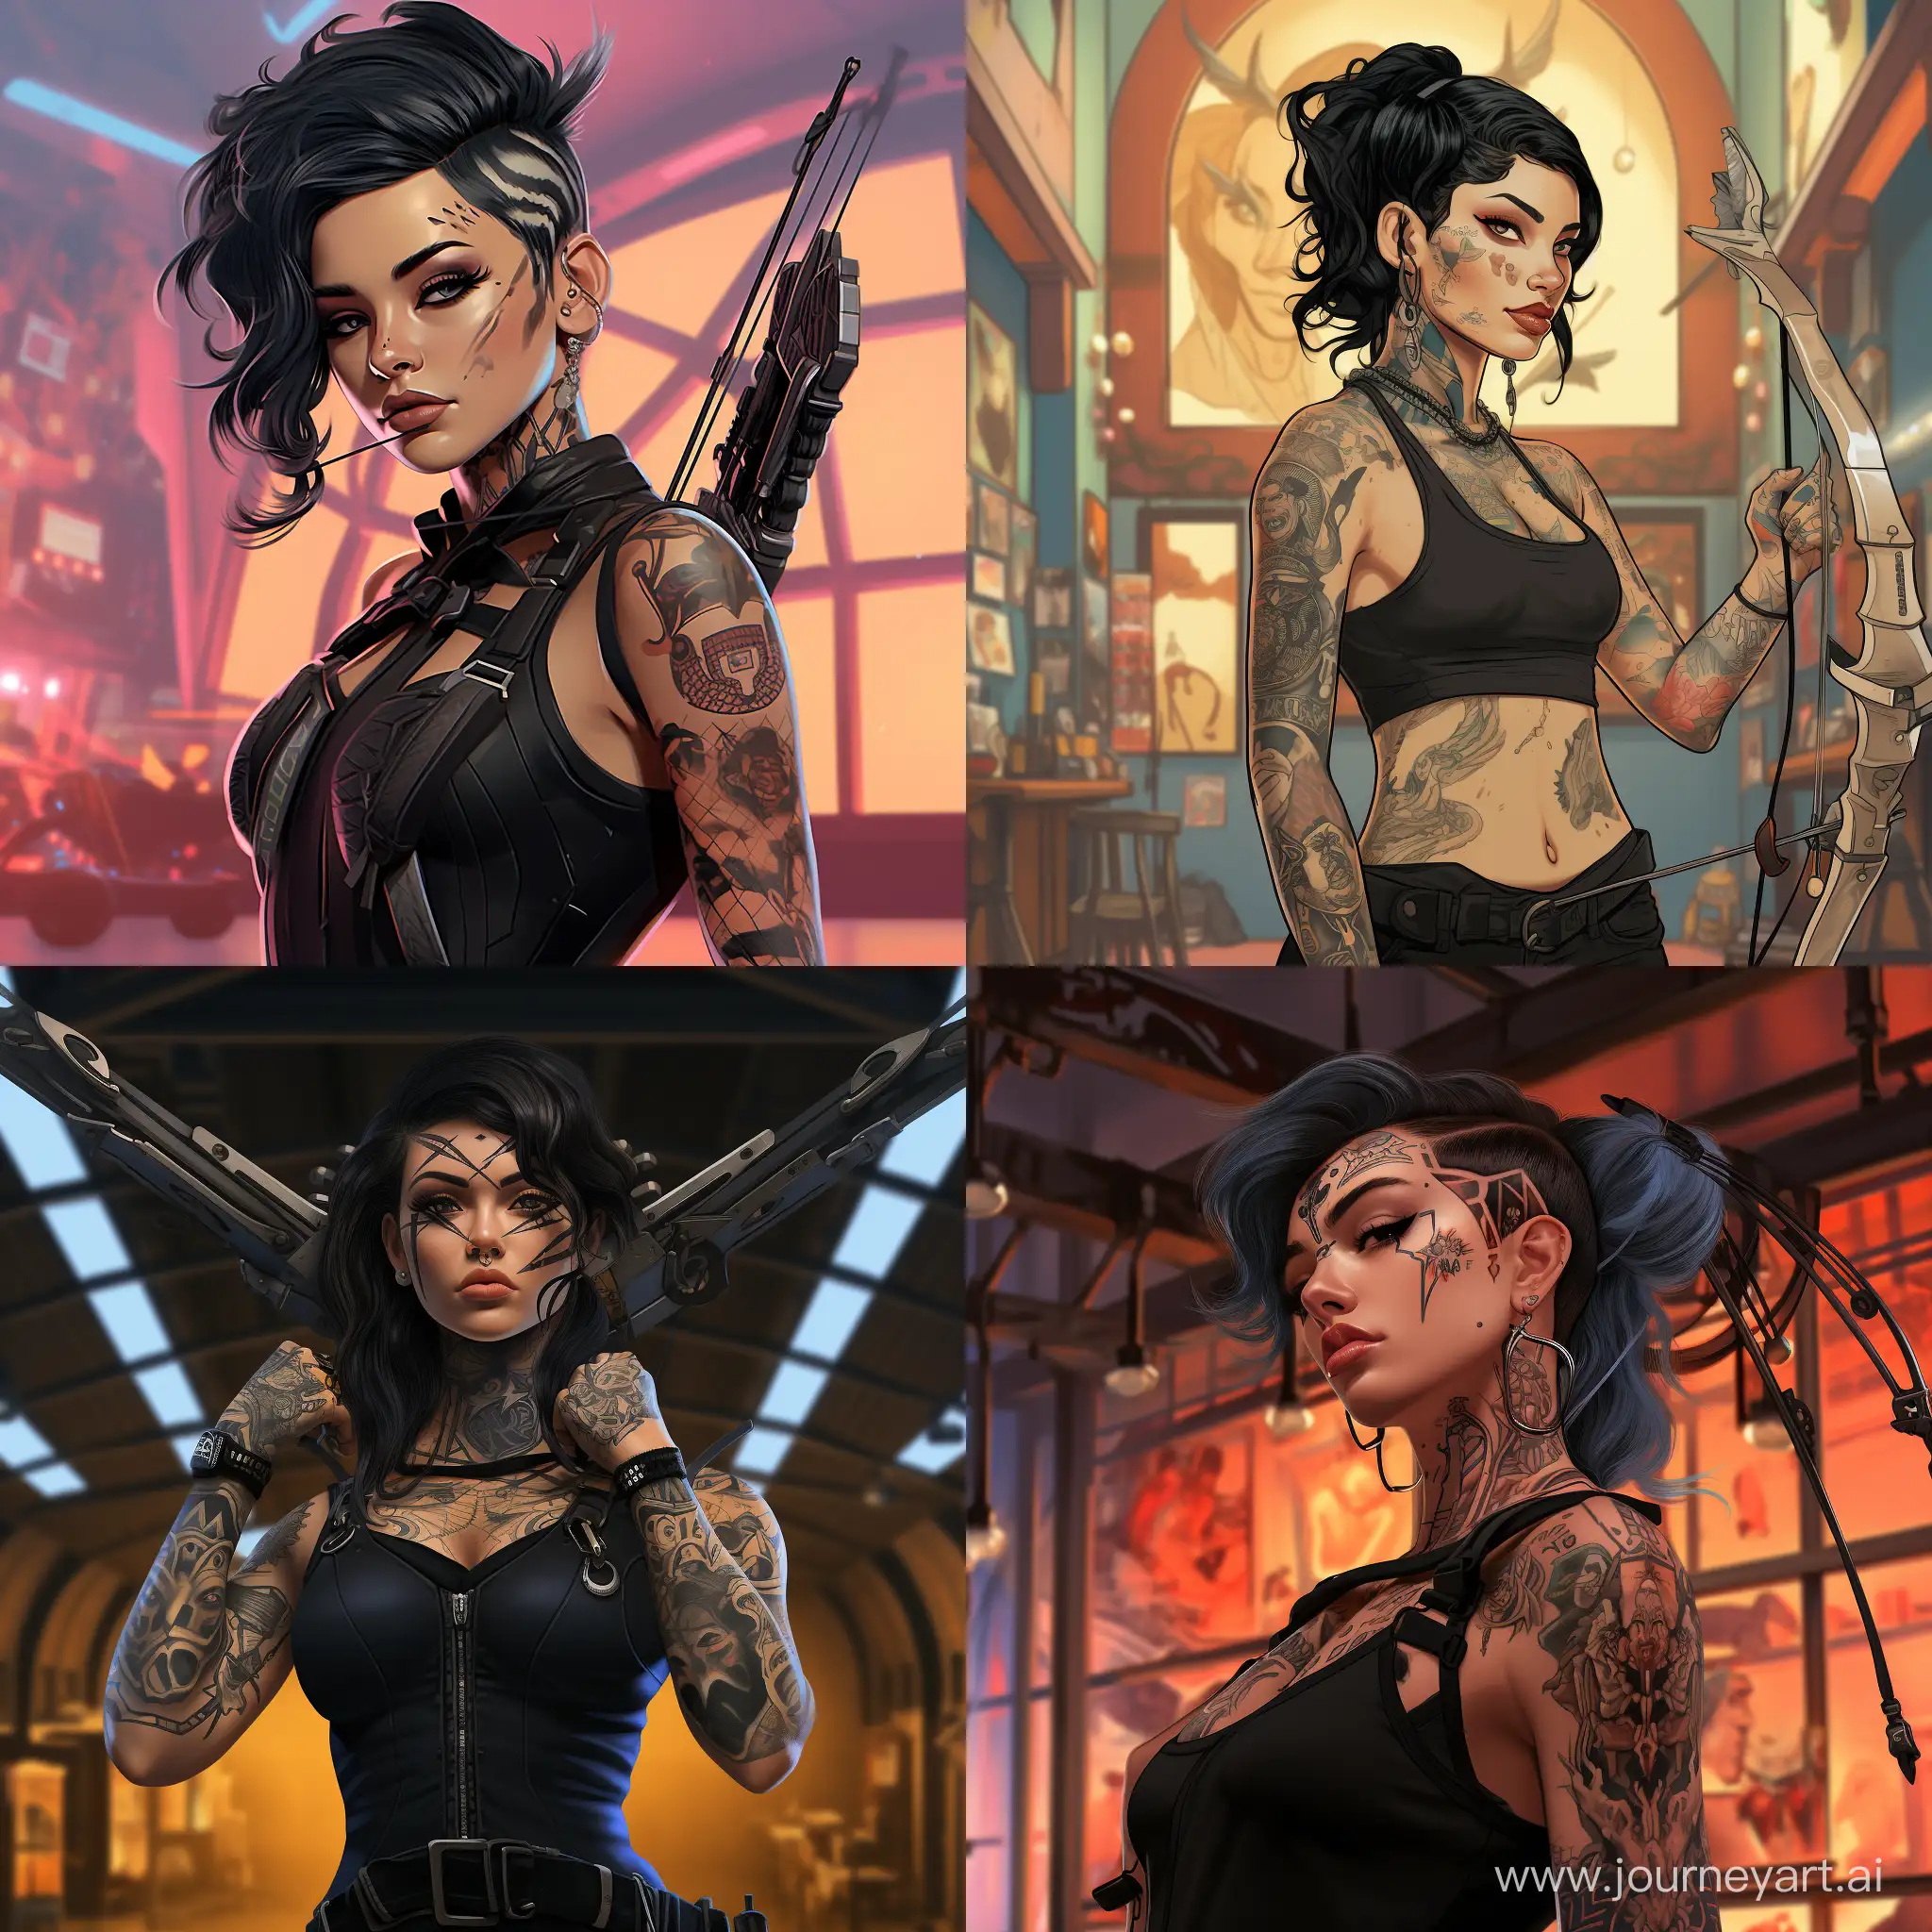 Digital art of a punk woman with black hair, a nose piercing and tattoos. She is doing an action pose and holding a compound bow. She has piercing eyes. The background is the hall of a tech industry and everything is clean and organized. The woman is smirking.